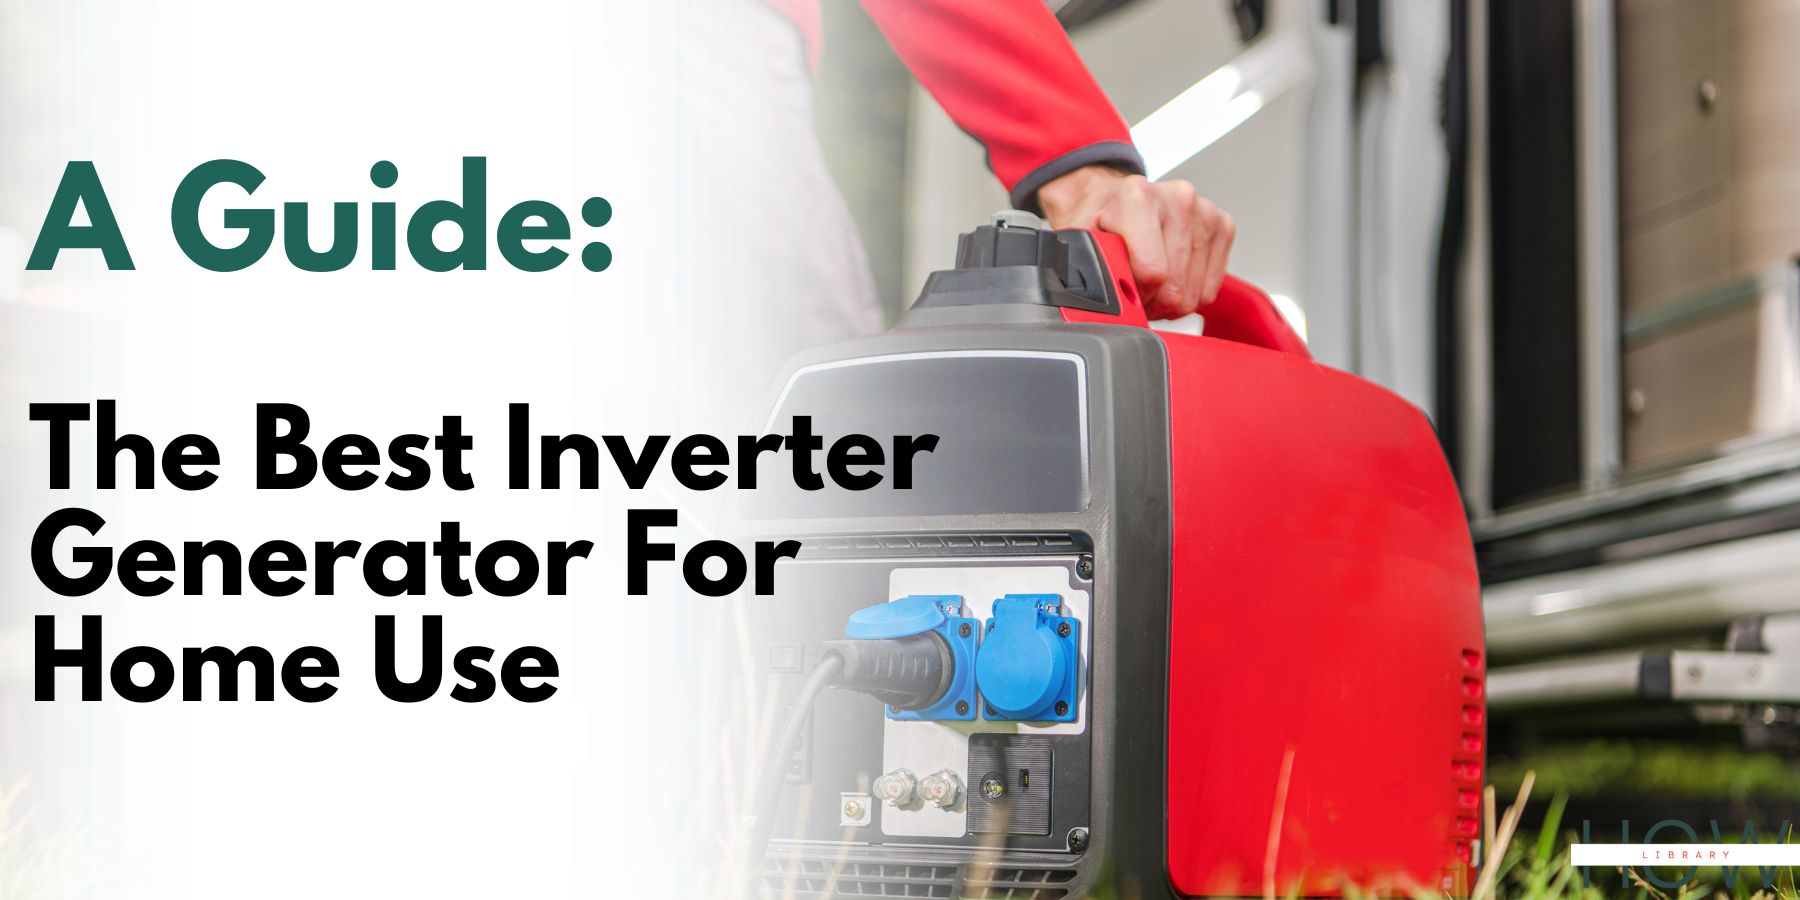 A Guide To The Best Inverter Generator For Home Use